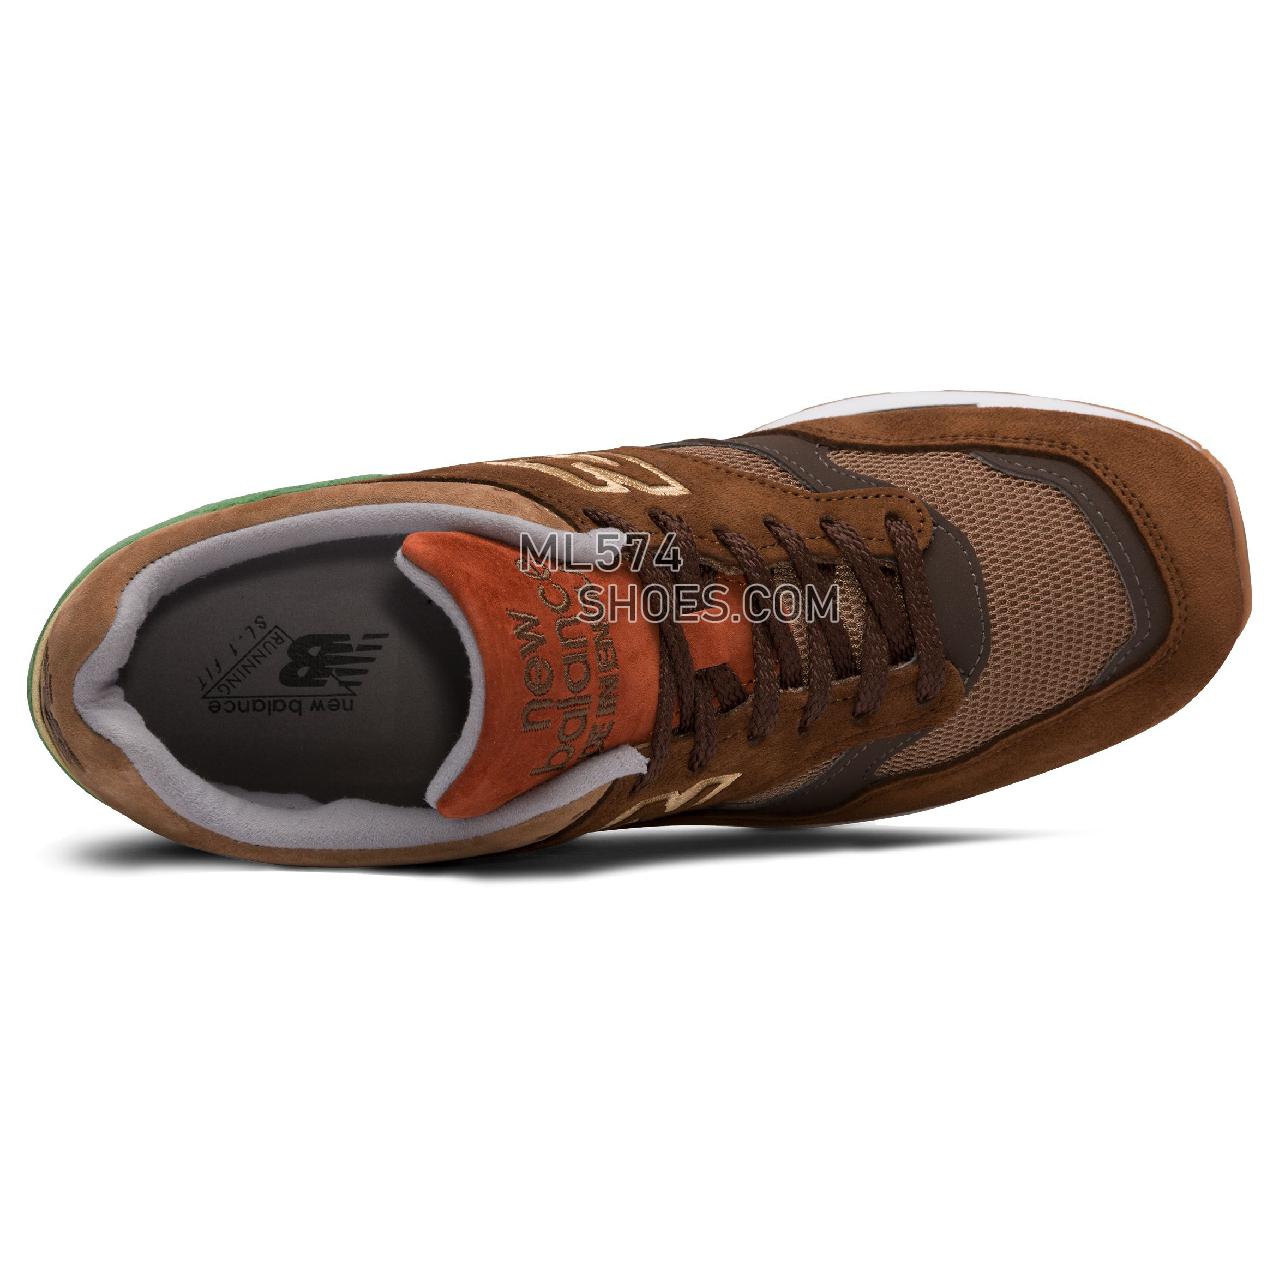 New Balance 1500 Made in UK - Men's 1500 - Classic Brown with Green - M1500LN